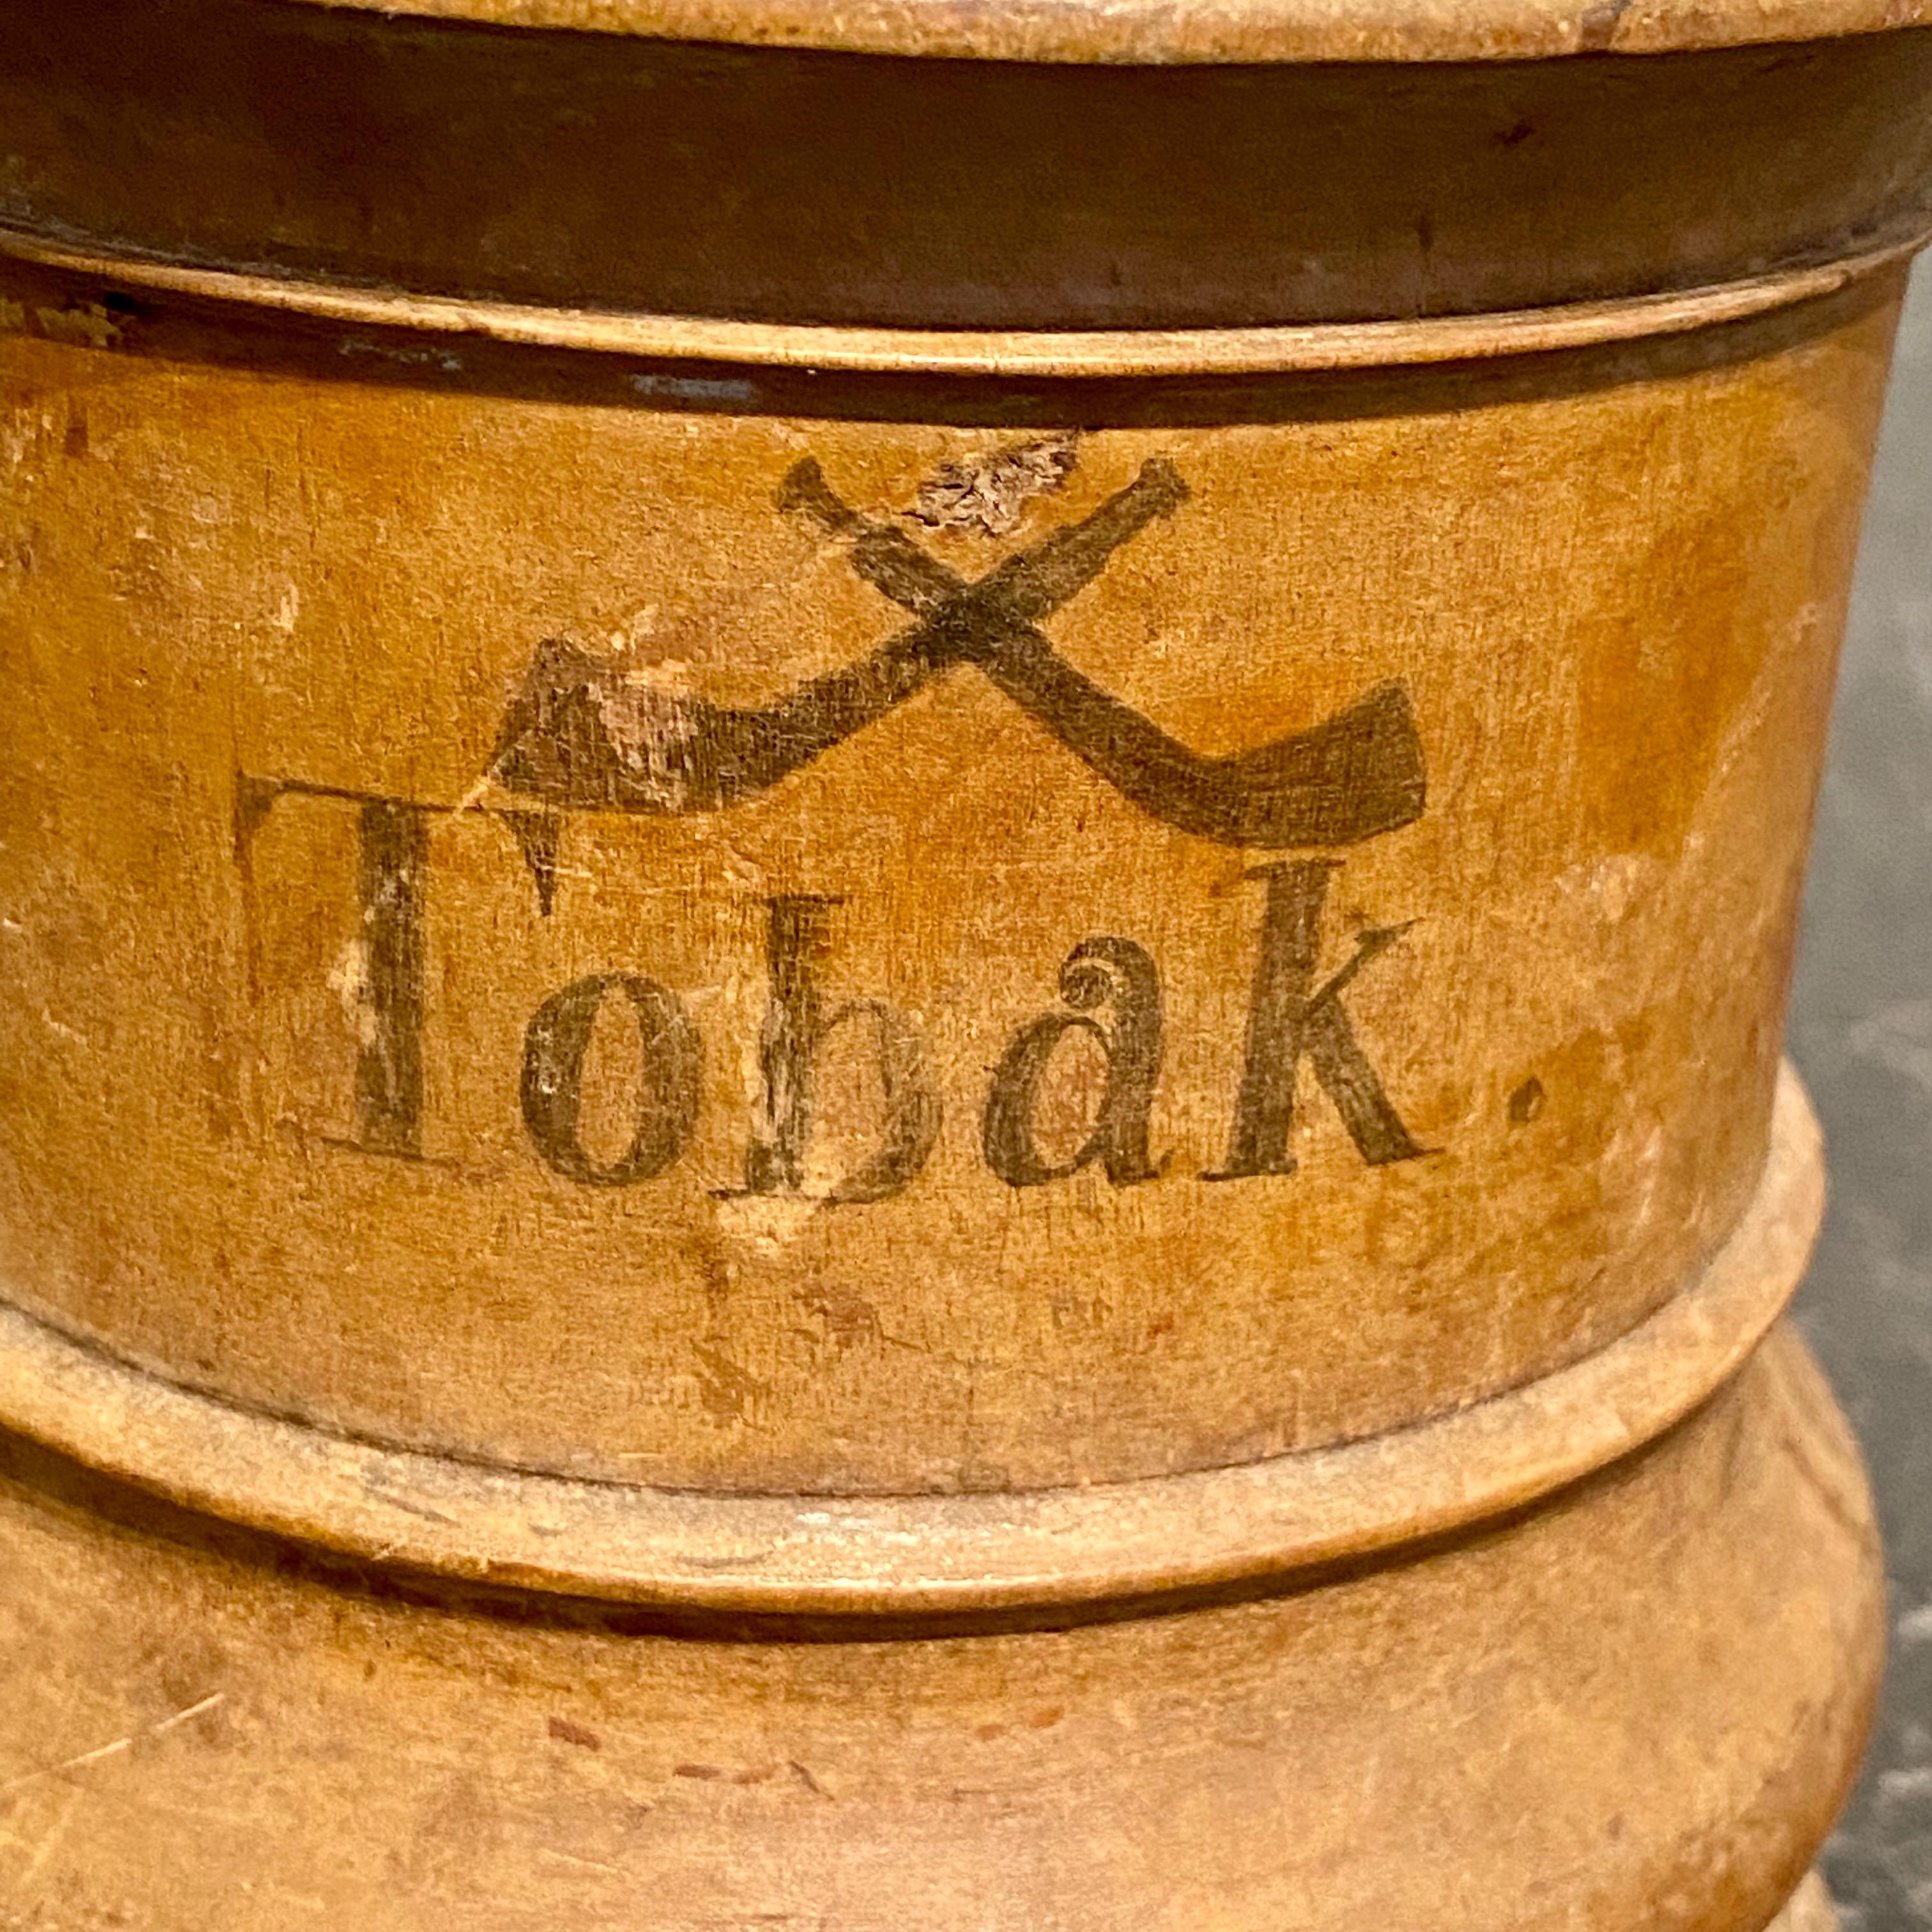 Hand-Crafted Small Danish Wooden Tobacco Jar, circa 1800-1825 For Sale